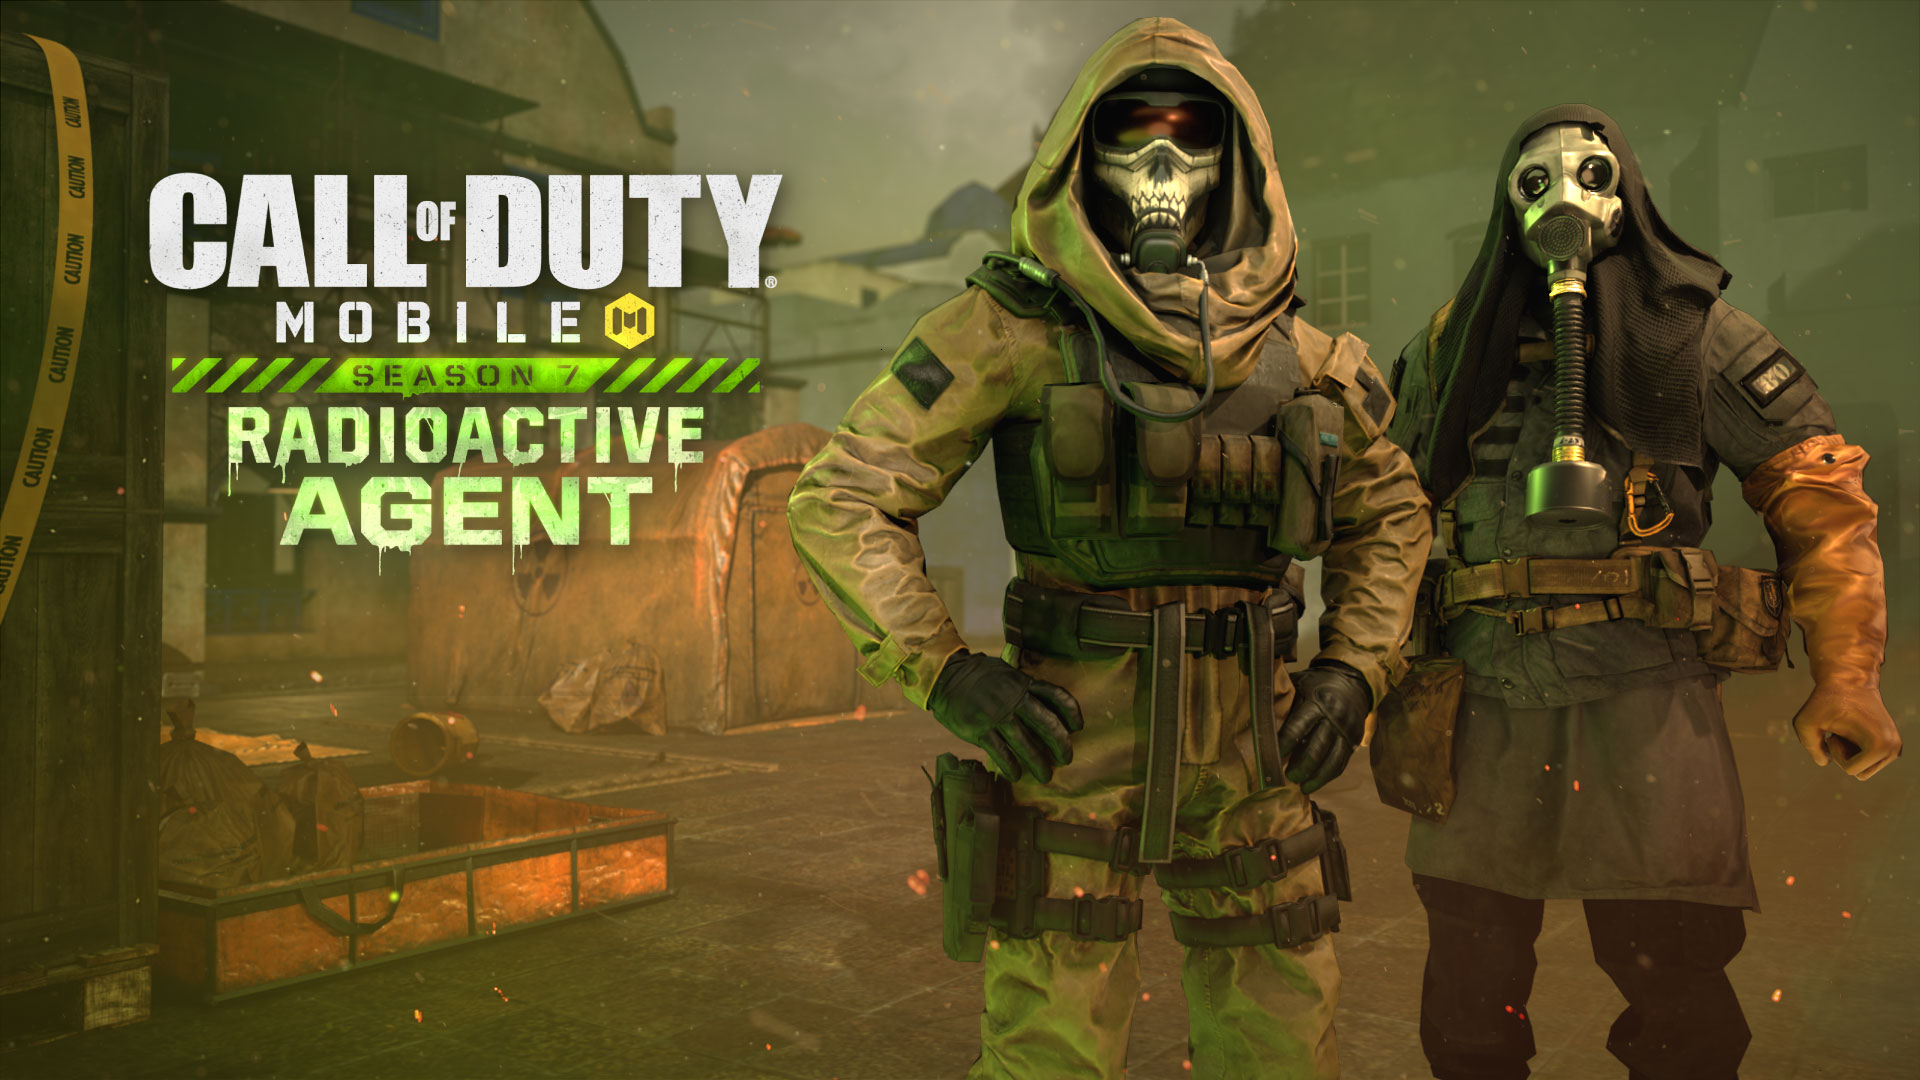 Radioactive Agent The New Season Of Call Of Duty Mobile Is Now